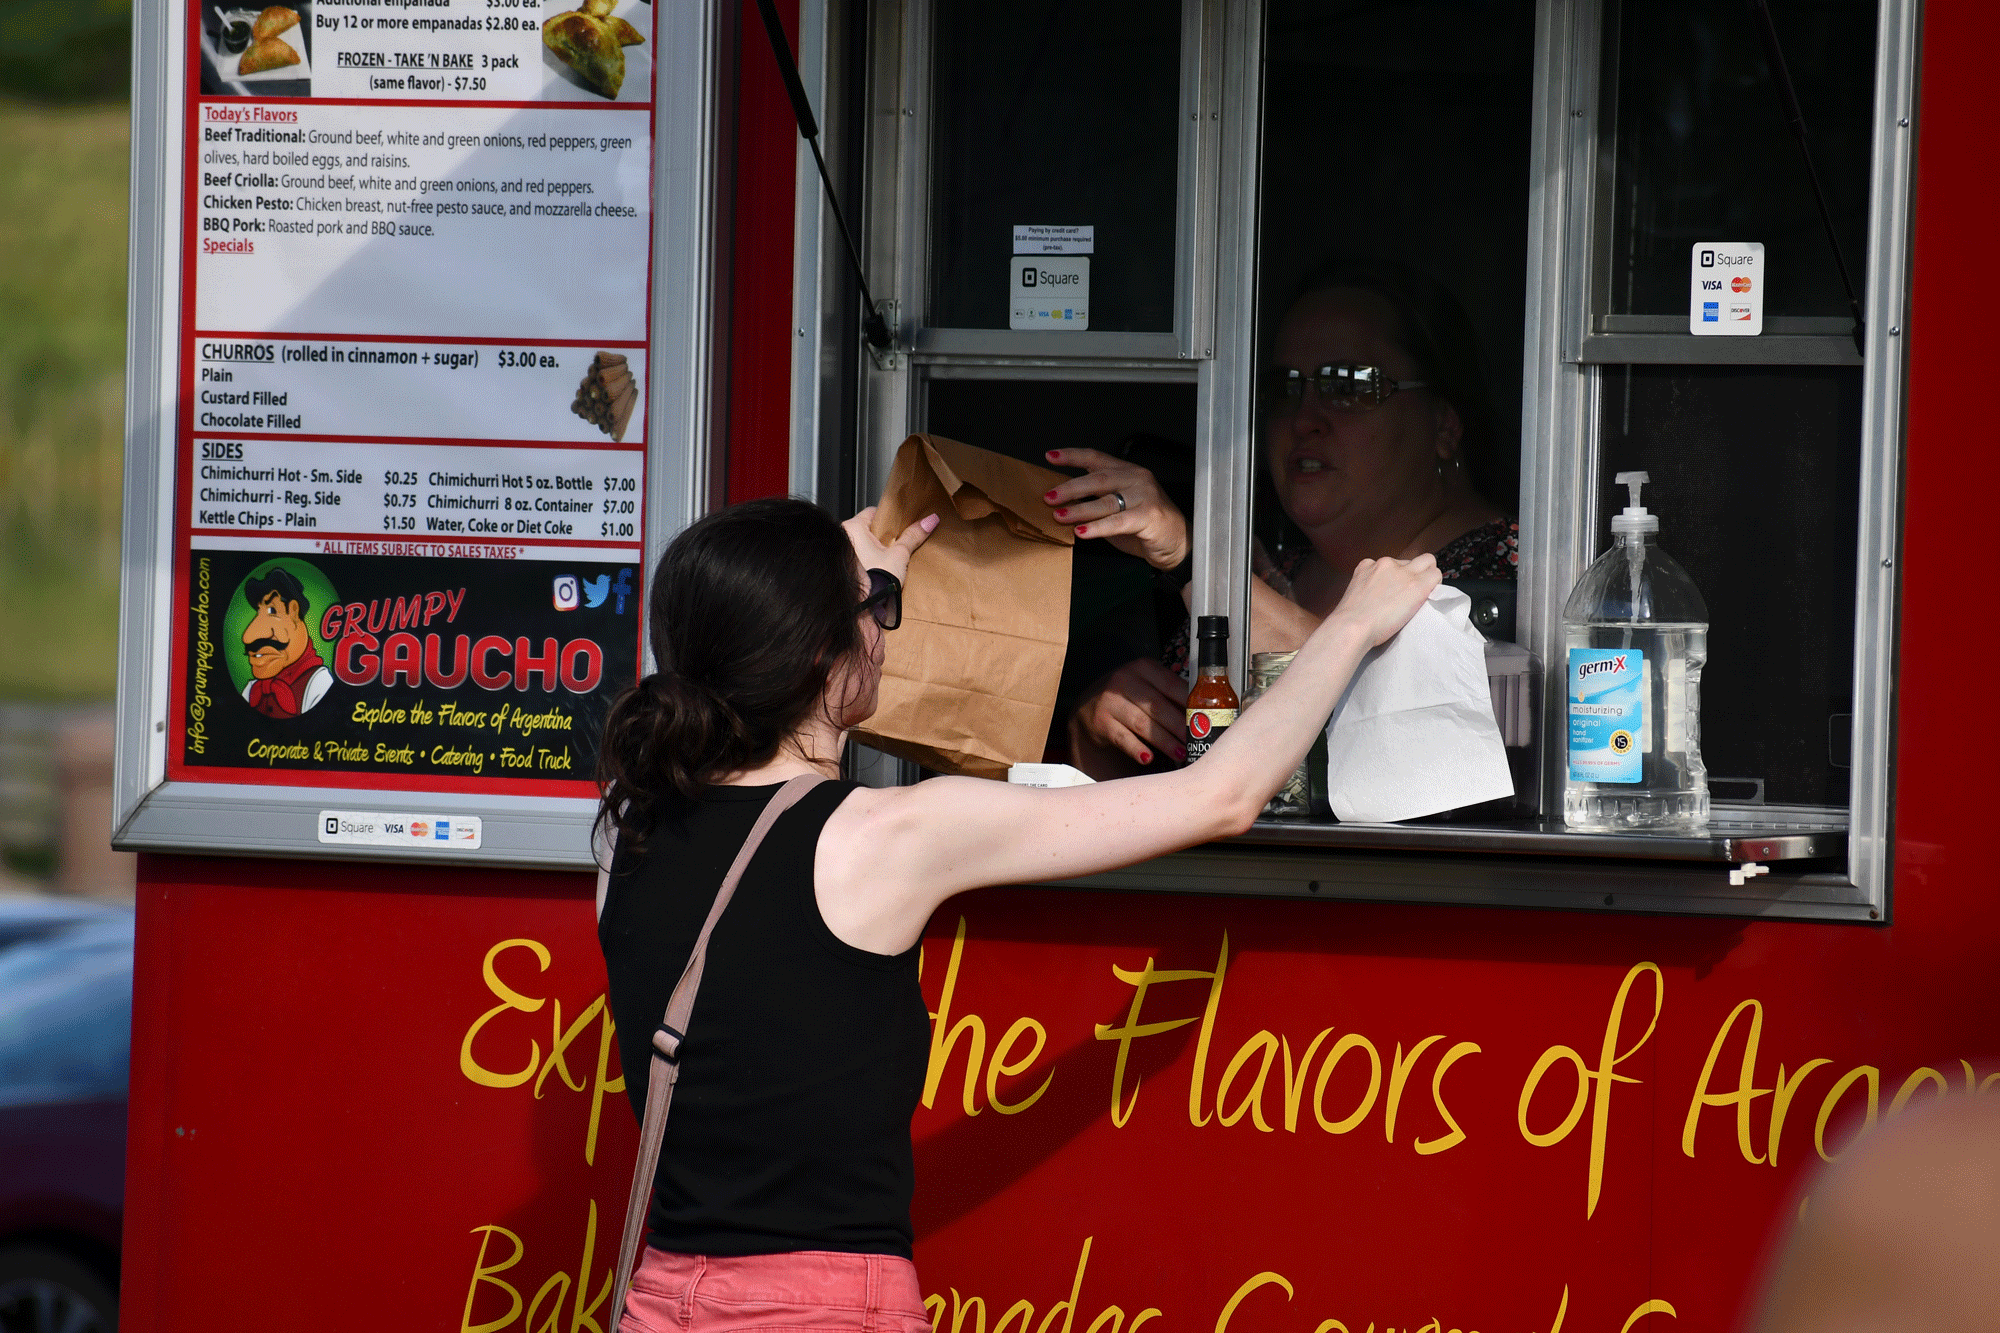 A women receiving her food from the window of a food truck.